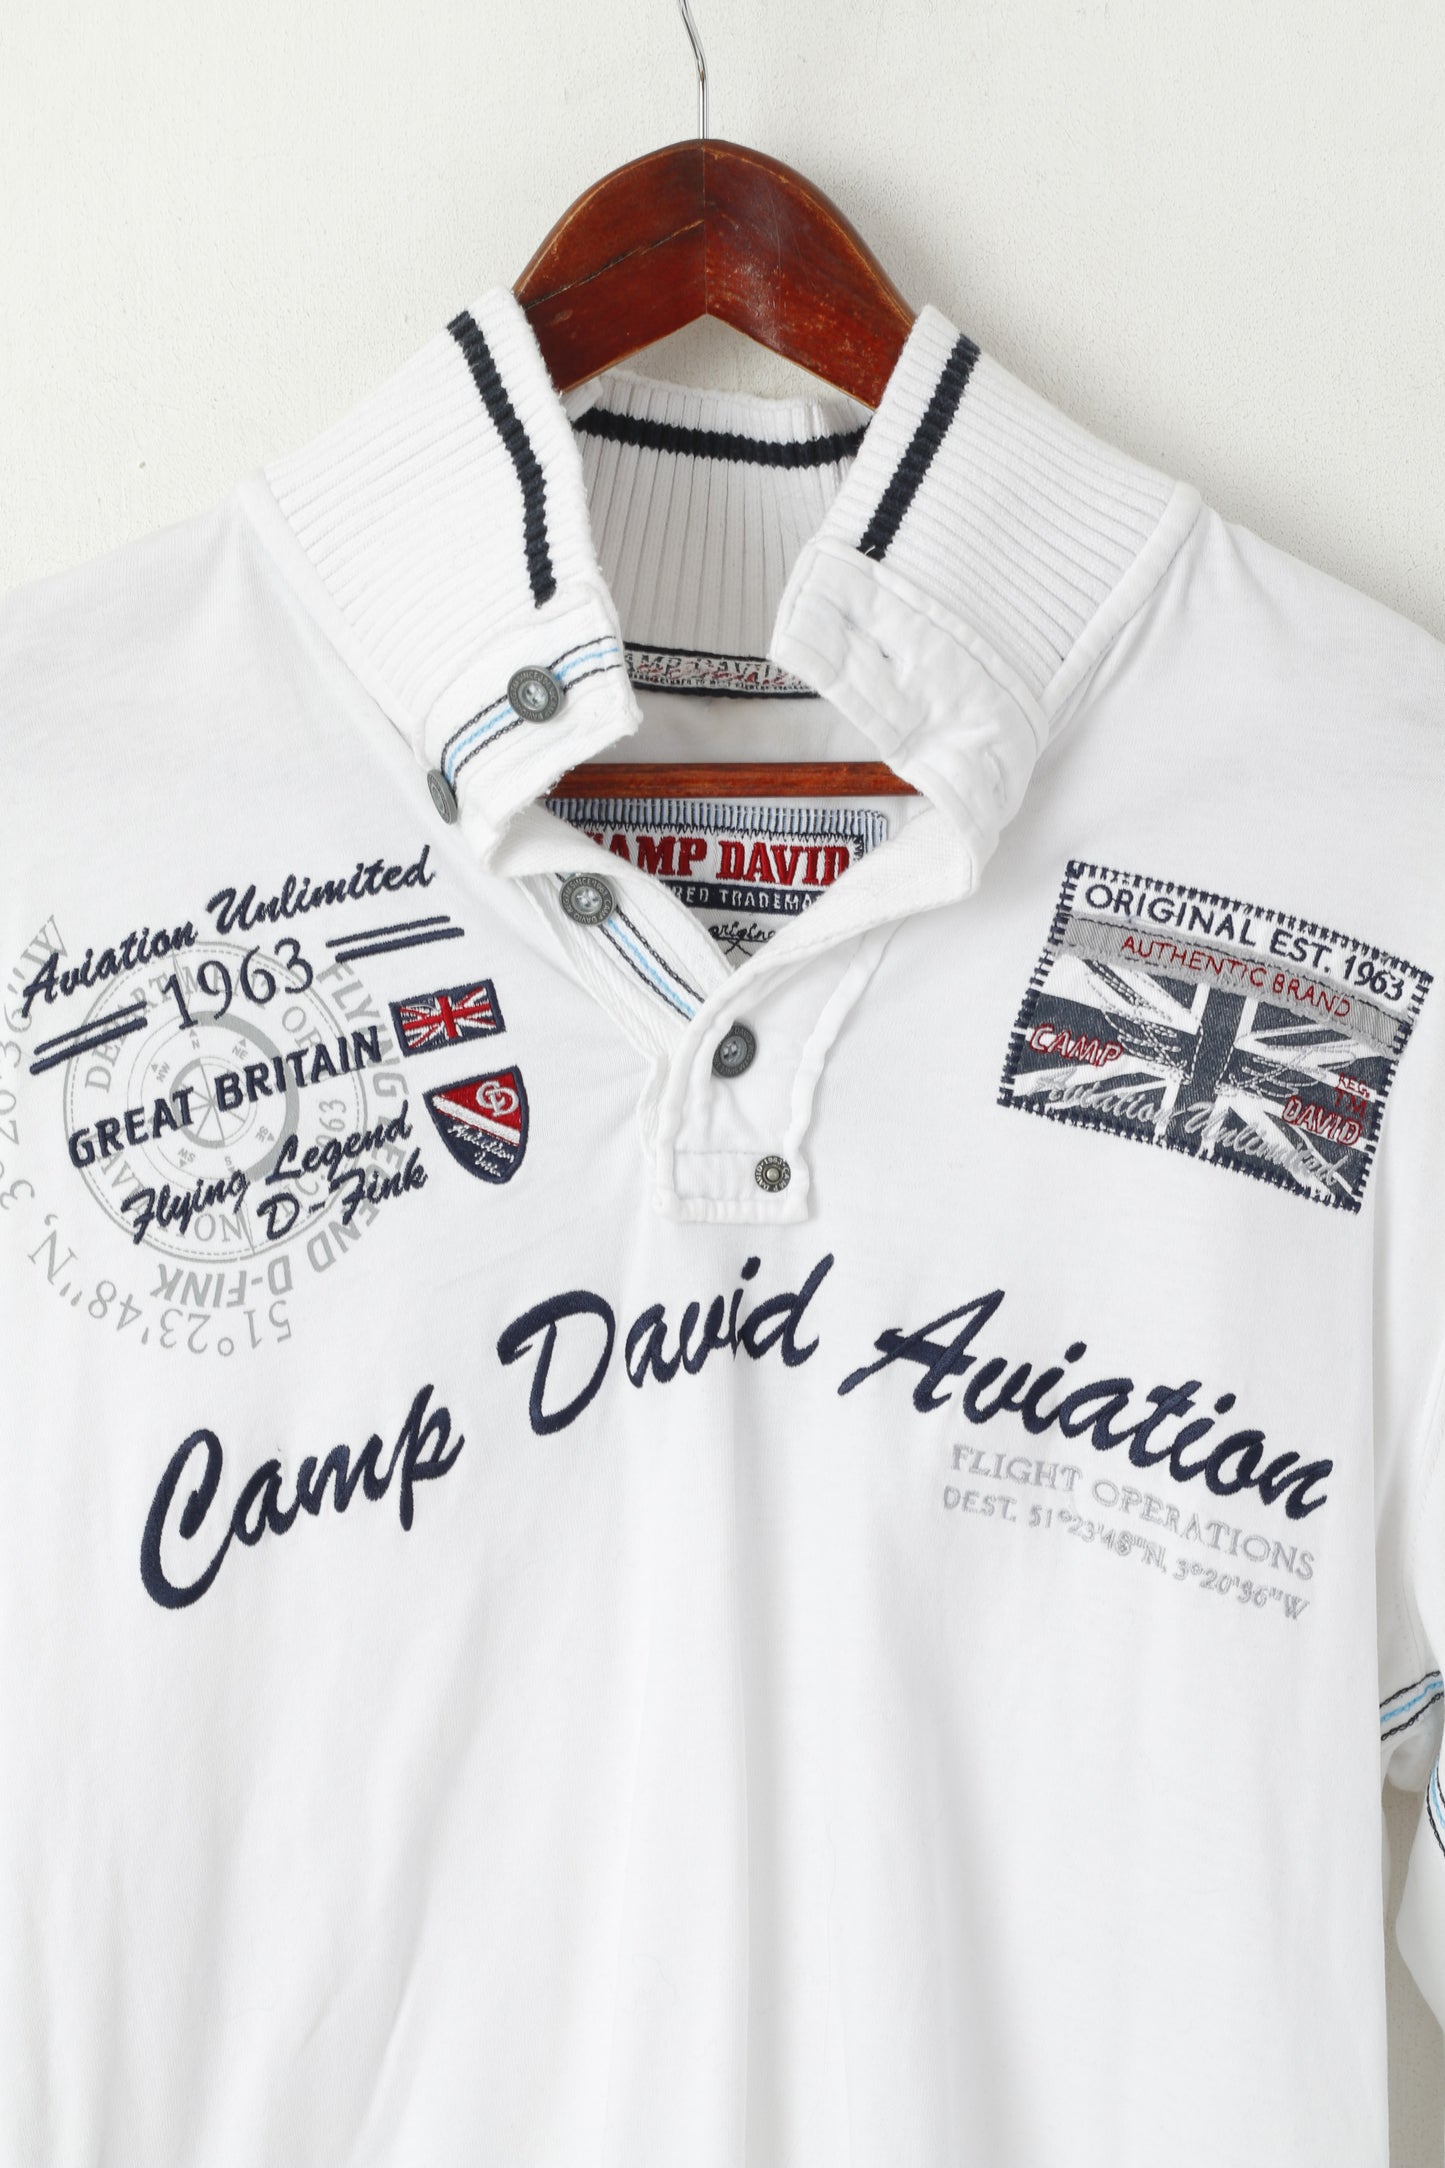 Camp David Men M Shirt White Cotton GB Emroidered Detailed Buttons Long Sleeve Top